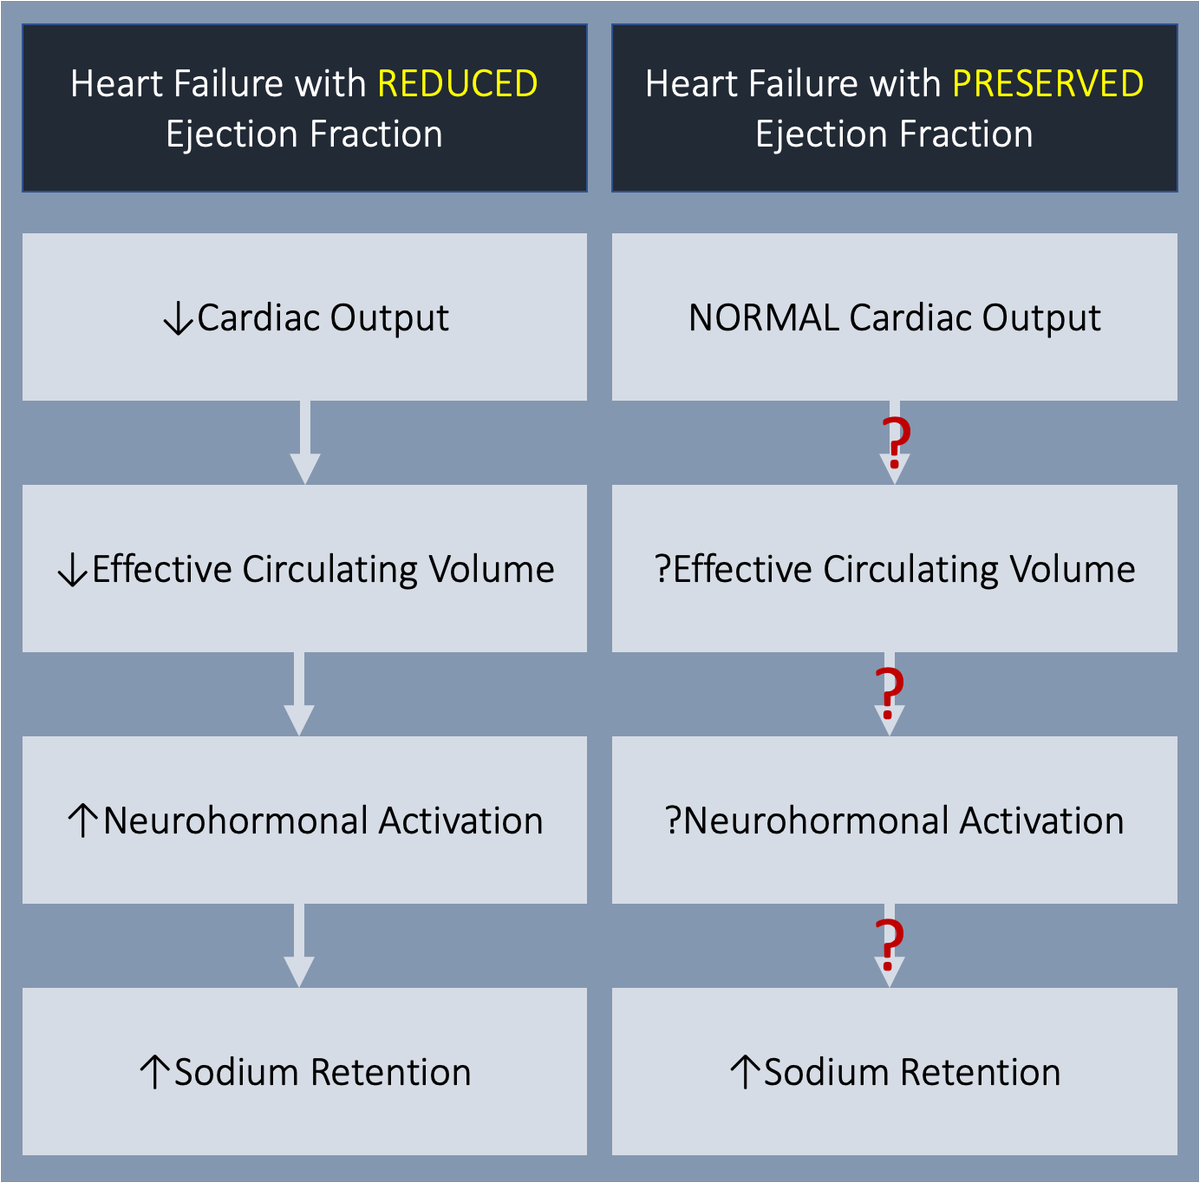 1/18 🤔Why does heart failure with preserved ejection fraction (HFpEF) lead to sodium retention? With reduced ejection fraction (HFrEF), decreased cardiac output (CO) leads to neurohormonal activation and sodium avidity. If CO is preserved in HFpEF, what's the inciting event?